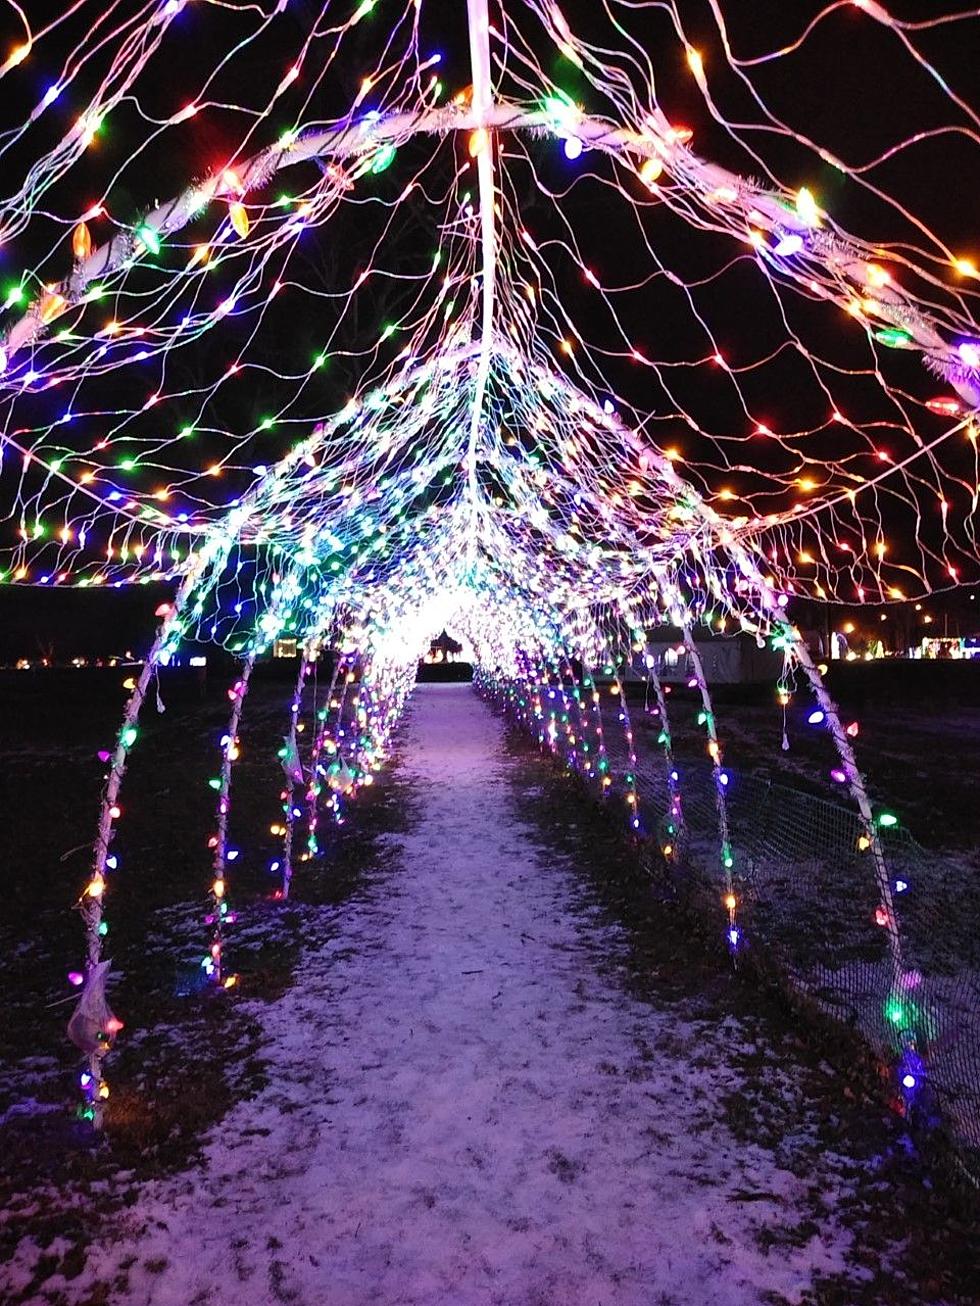 A Must-See: 2021 Oneonta, NY ‘Festival of Lights’ Is Almost Over